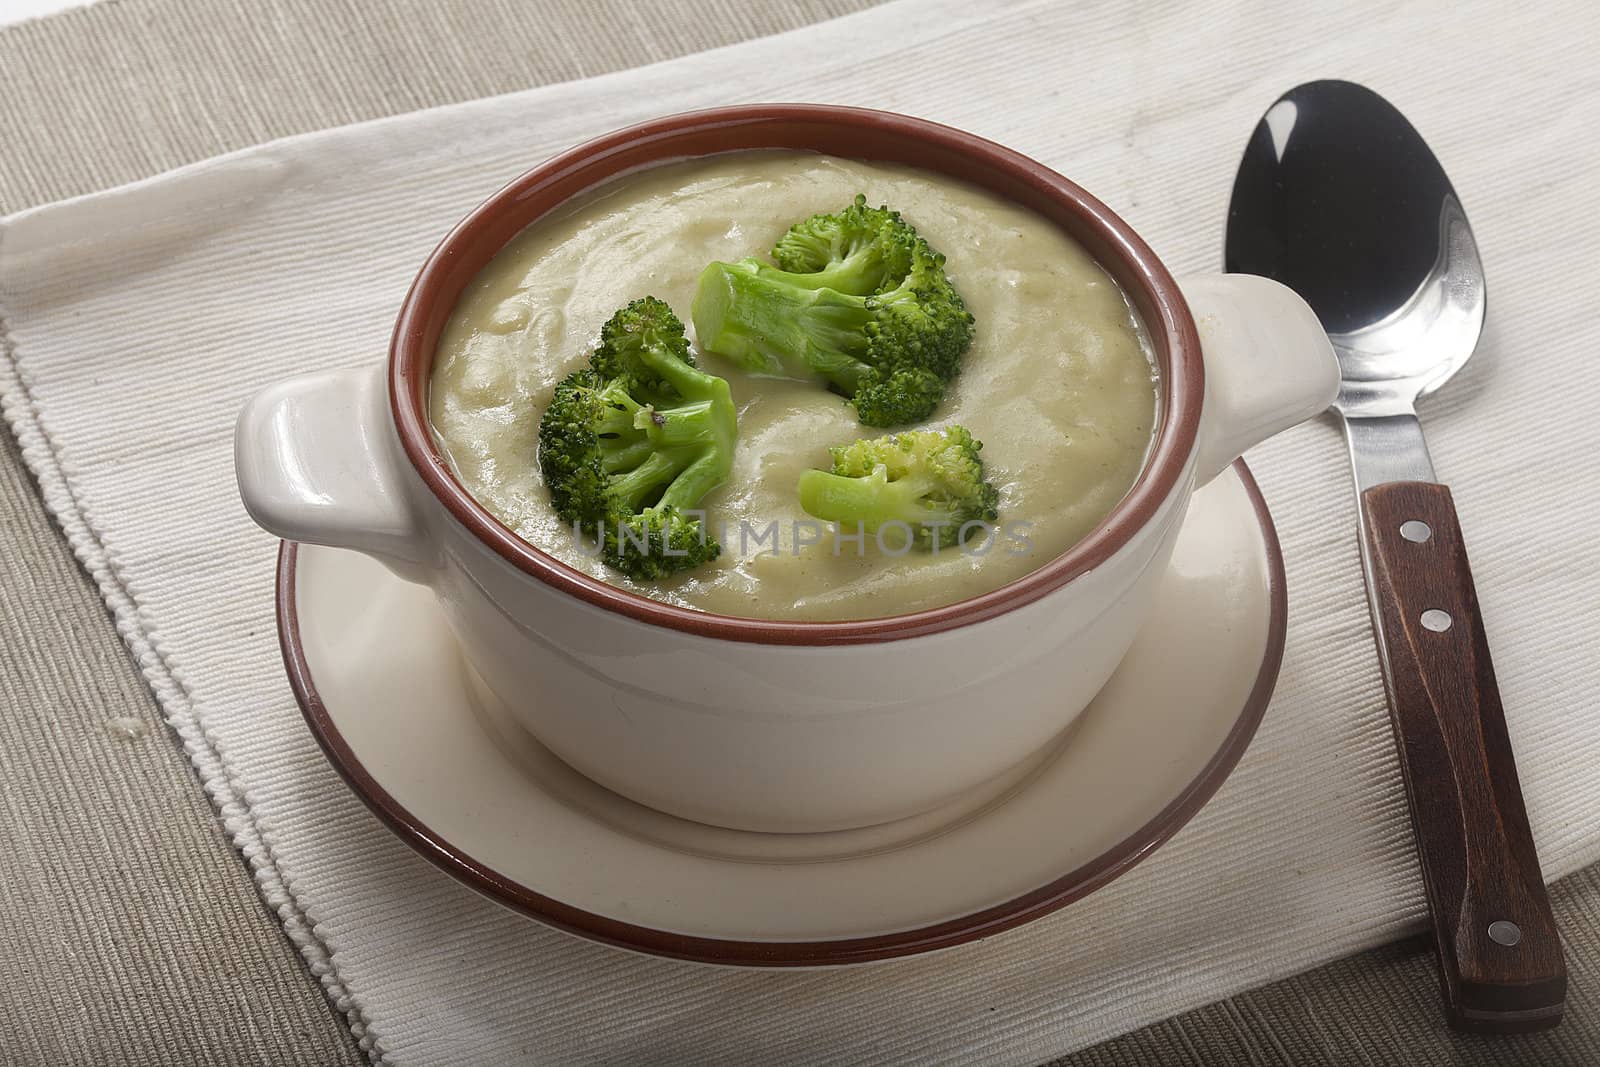 Cream soup with broccoli and dried crust in the bowl on the napkin